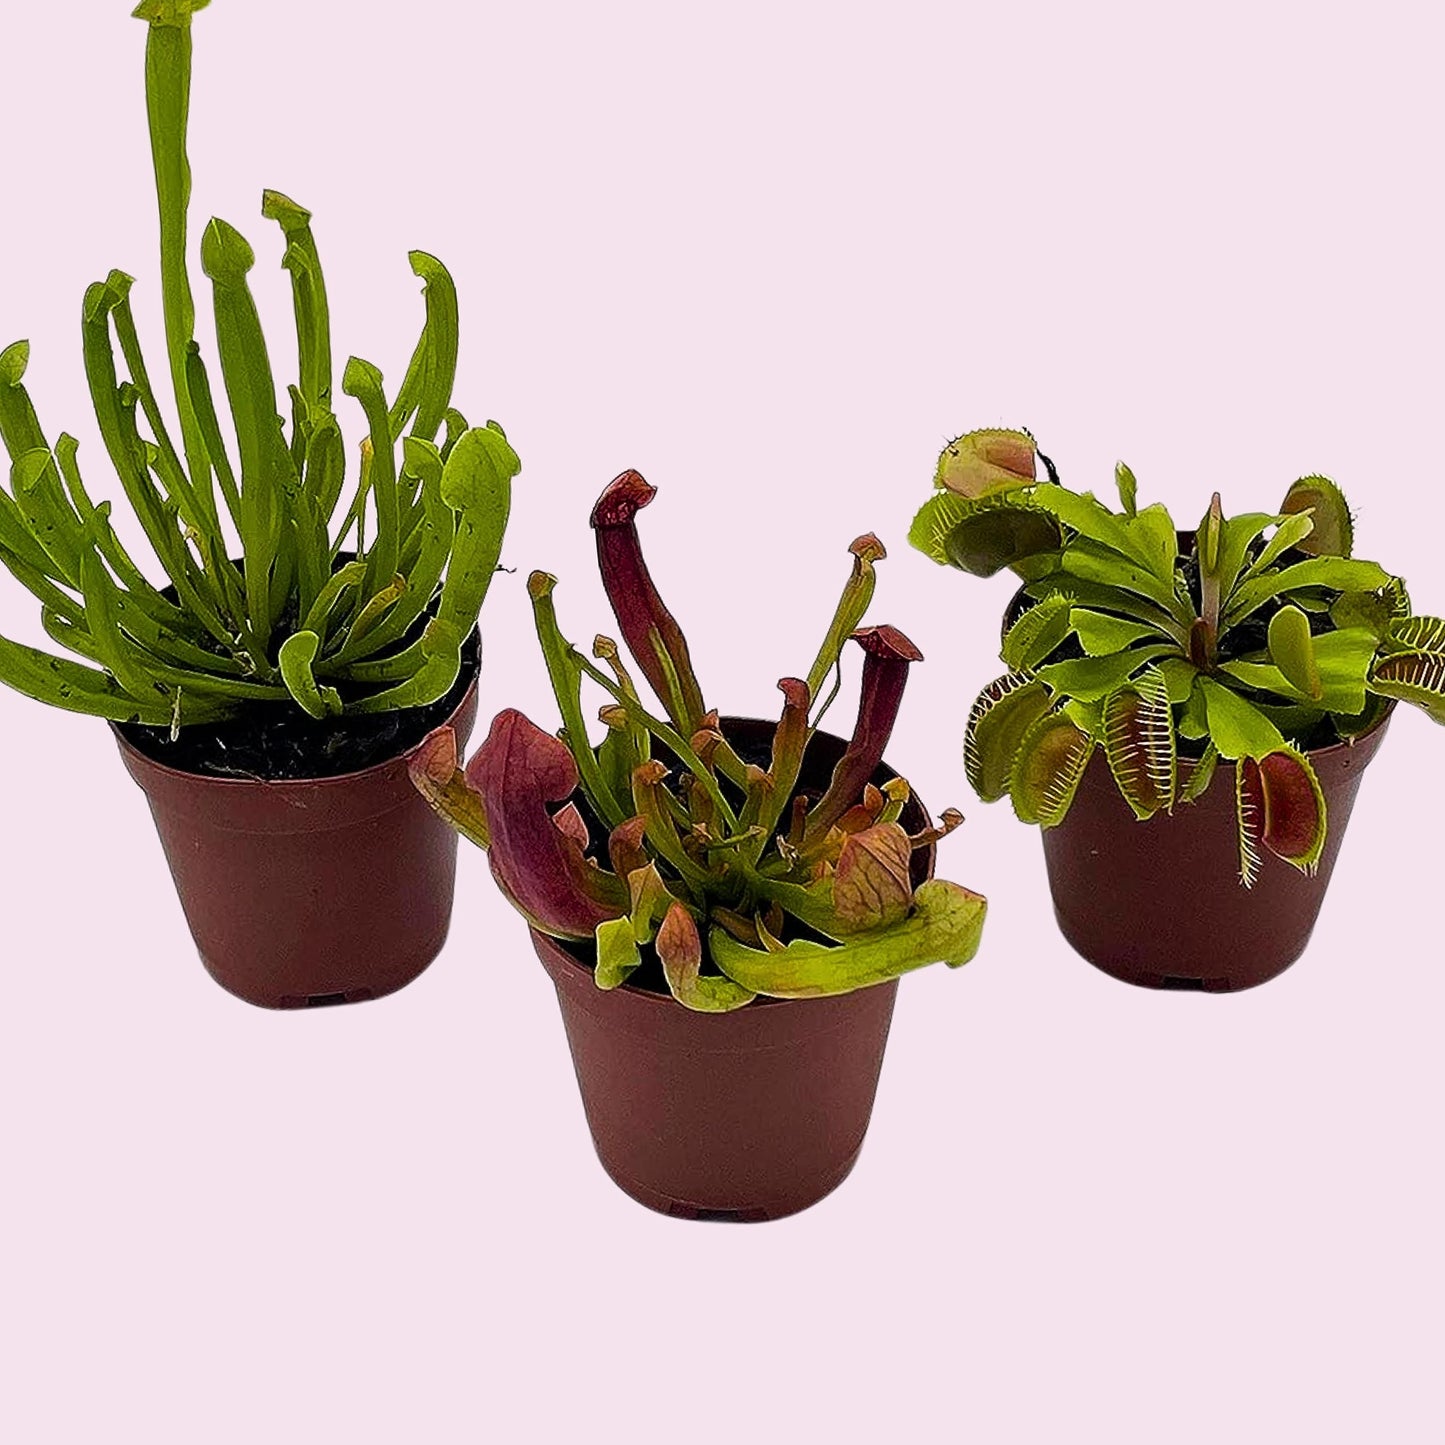 Carnivorous Plant Assortment Set, All Different Plant Species, 3 Live Potted Plants in 2 inch Pots by BubbleBlooms